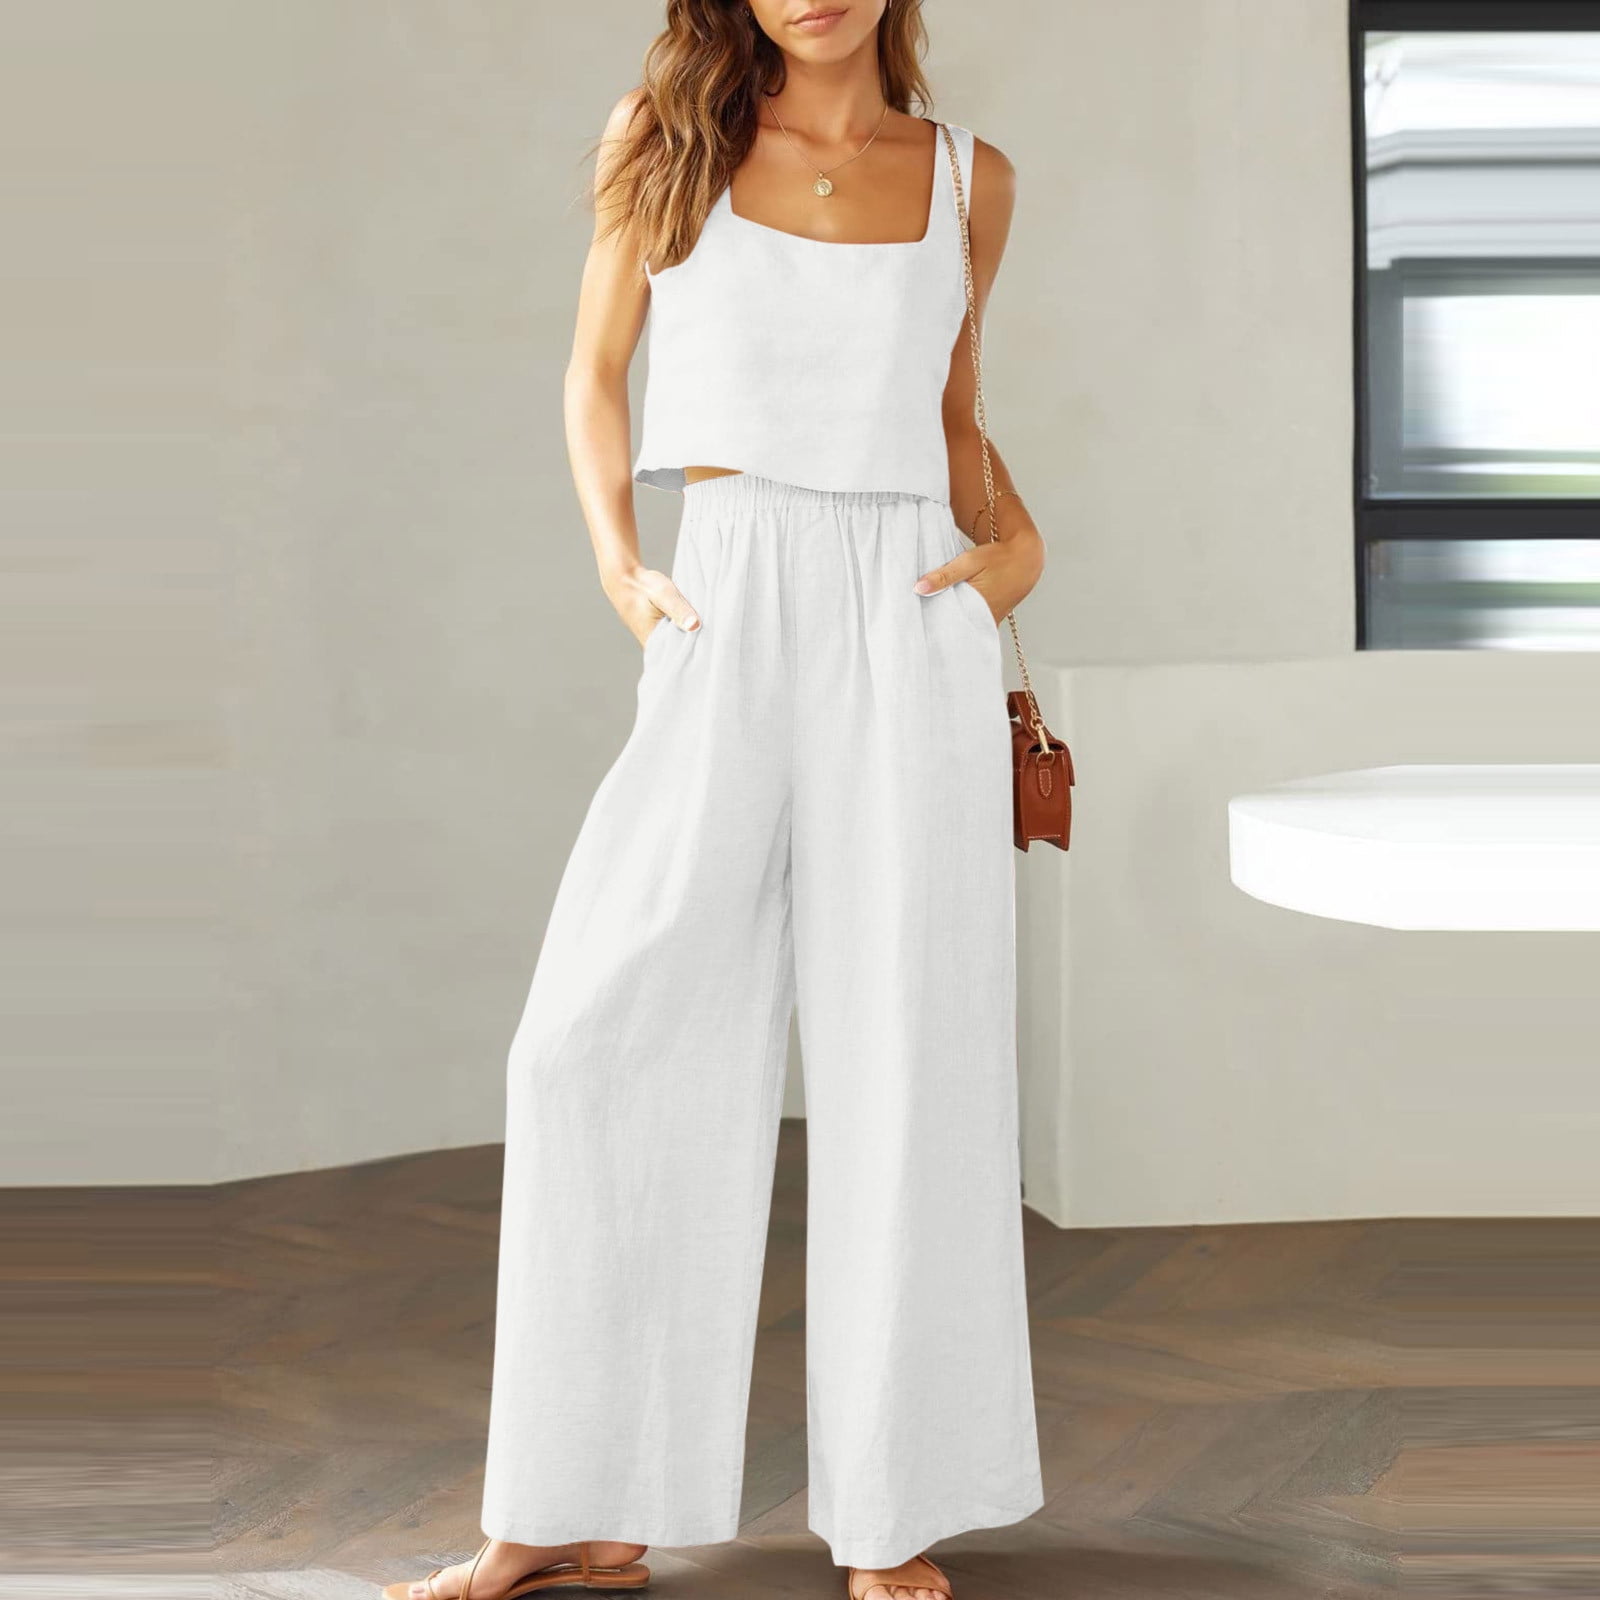  NUFIWI Women Summer Knit 2 Piece Pants Set Sleeveless Split  Tank Top and High Waist Wide Leg Pants Outfits Loungewear(A White,Small) :  Clothing, Shoes & Jewelry